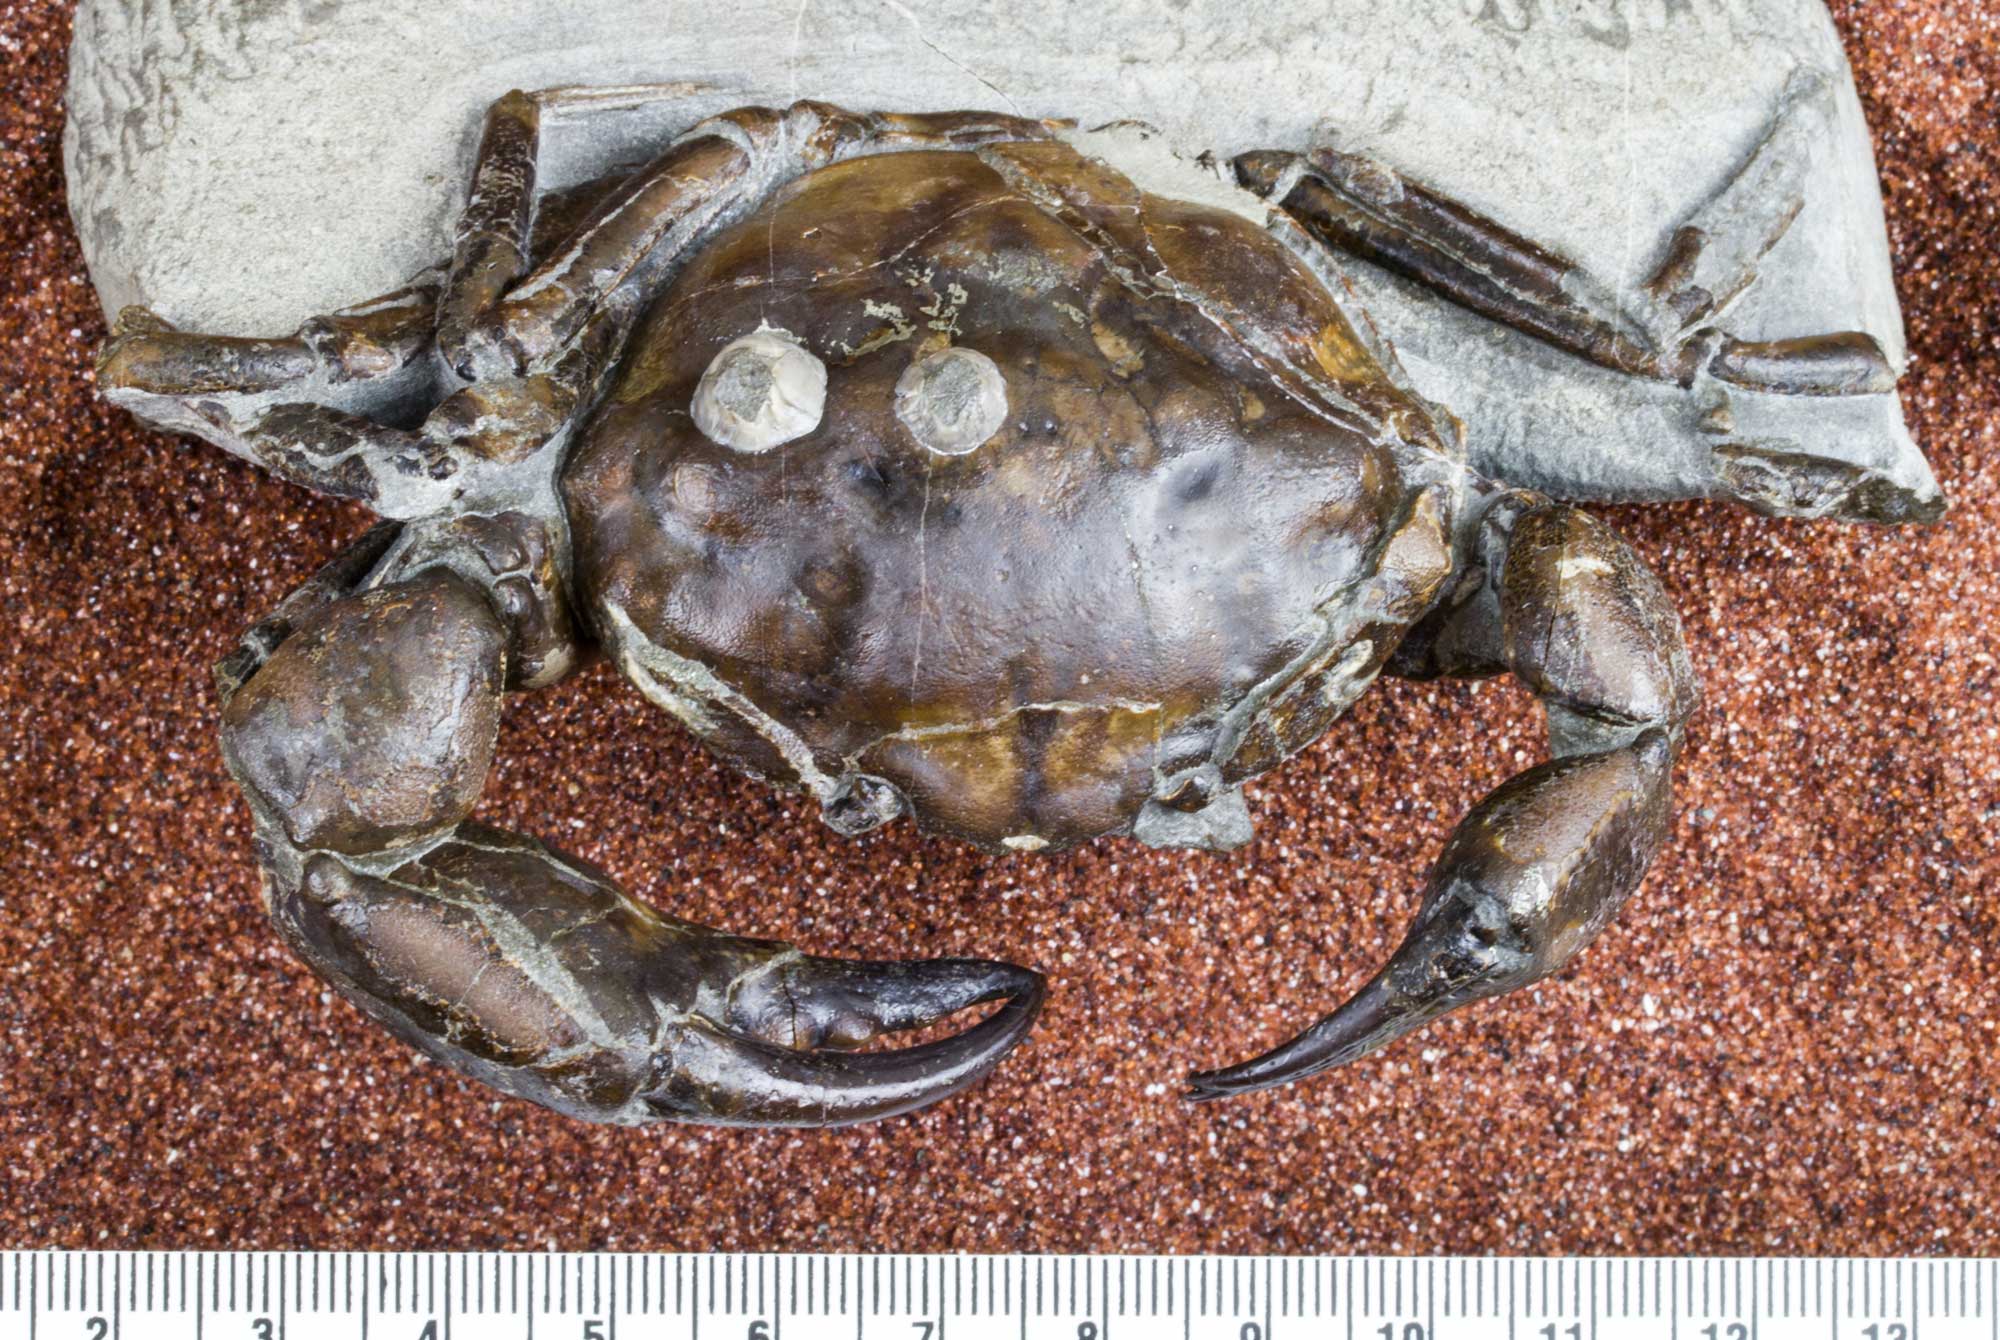 Photograph of concretion containing a fossil crab from the Oligocene of Oregon. The concretion has mostly been removed leaving a shiny brown, articulated crab partially embedded in gray rock. The body, pinchers, and legs of the crab are preserved.